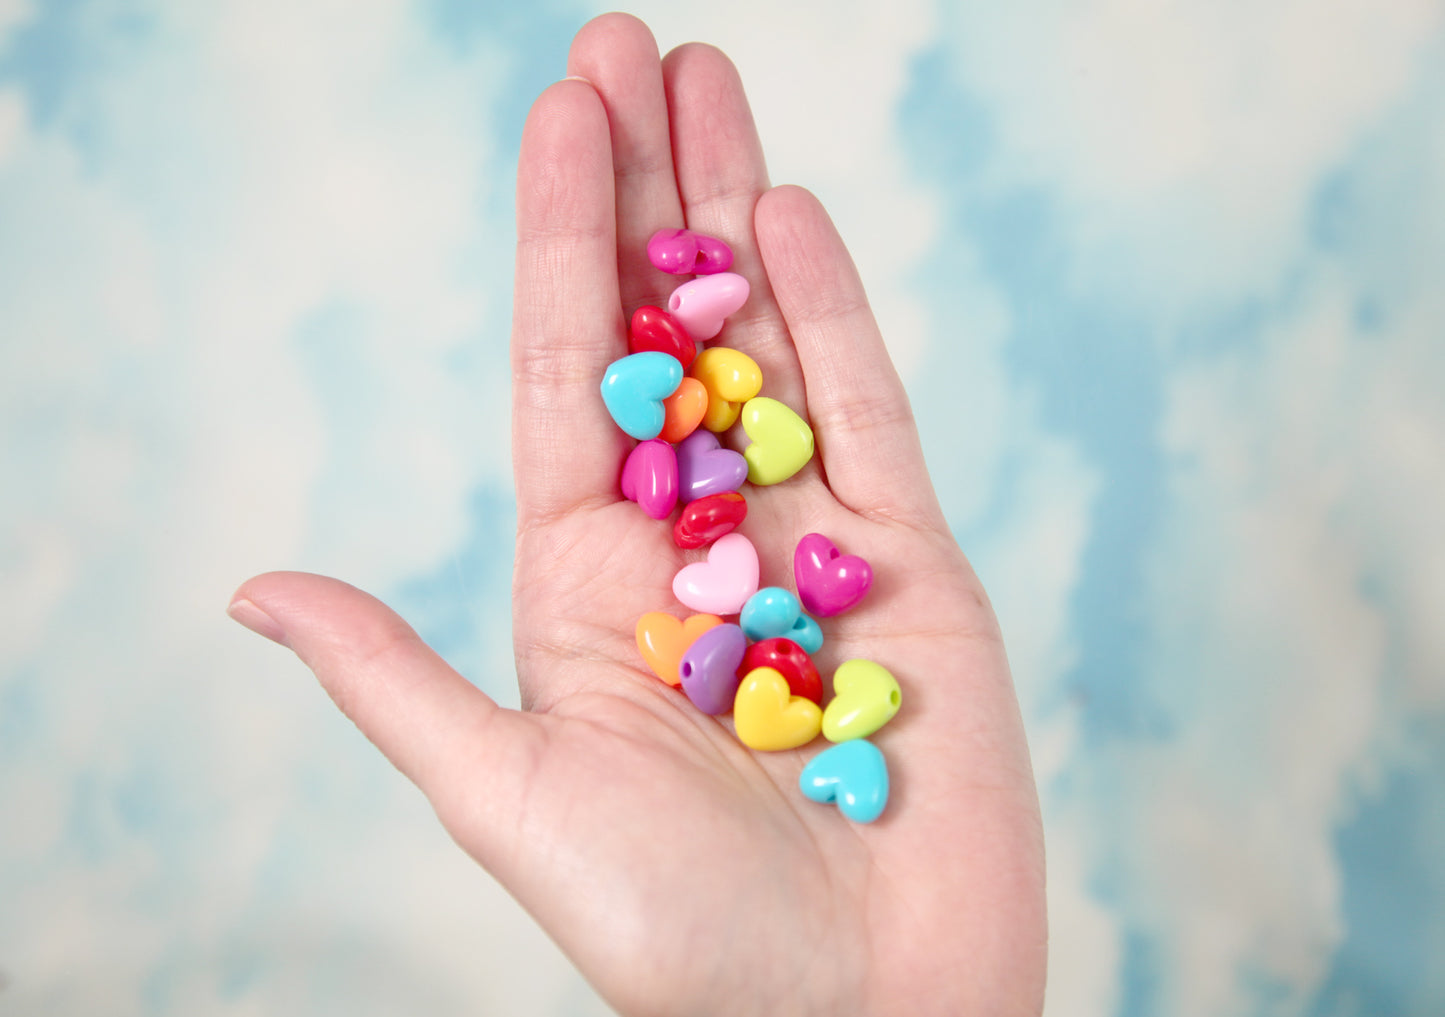 Plastic Heart Beads - 12mm Small Flat Bright Color Plastic Pastel Heart Resin or Acrylic Beads - 80 pc set